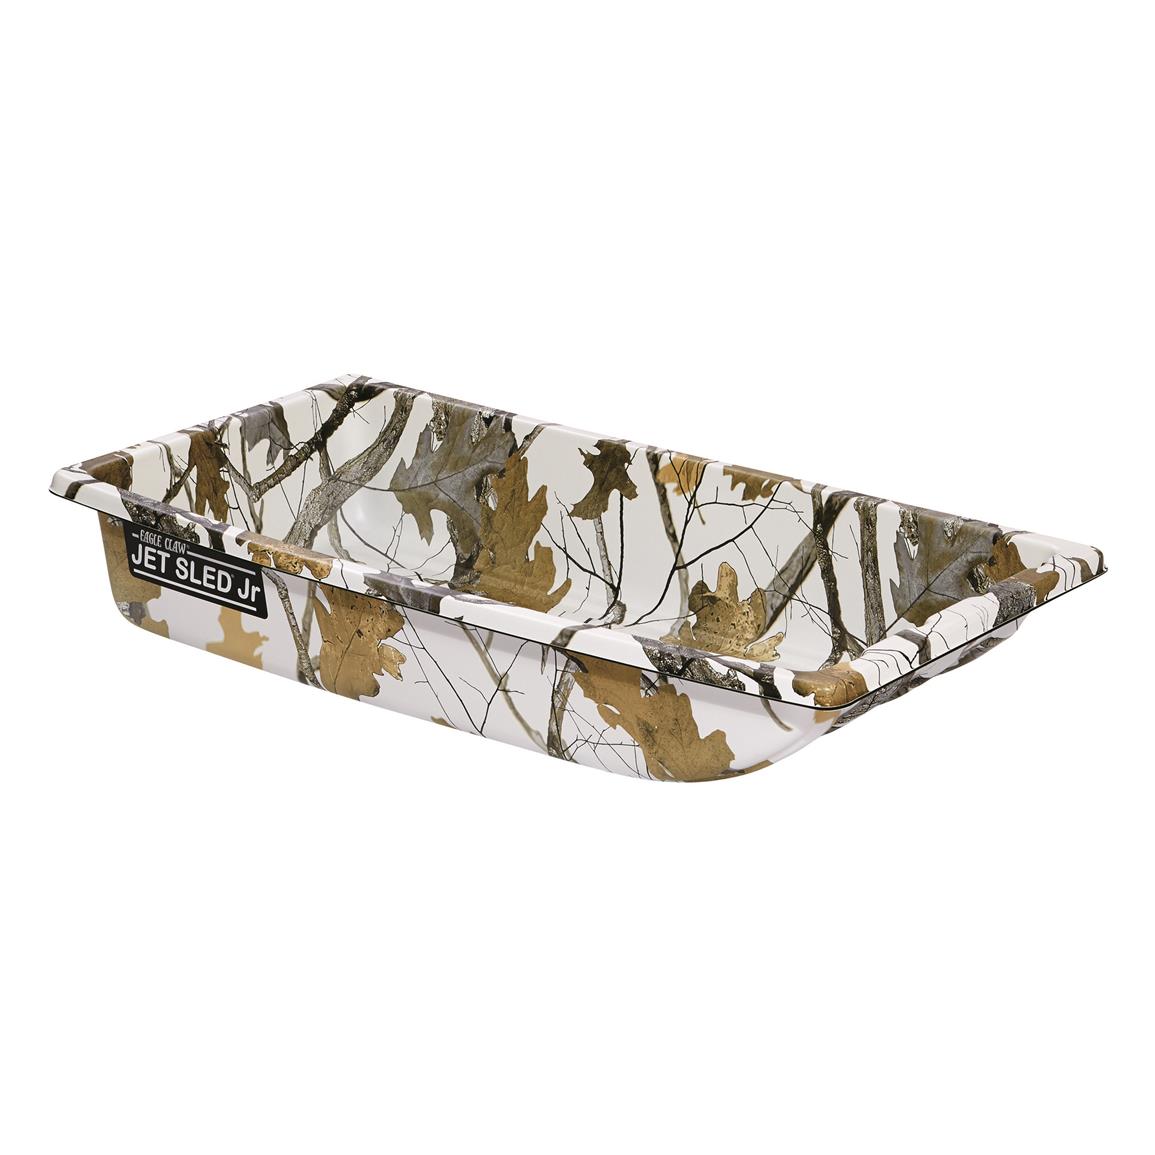 Shappell Ice Fishing Jet Sled XL Winter Camo Gear Haul Transport Storage Outdoor 